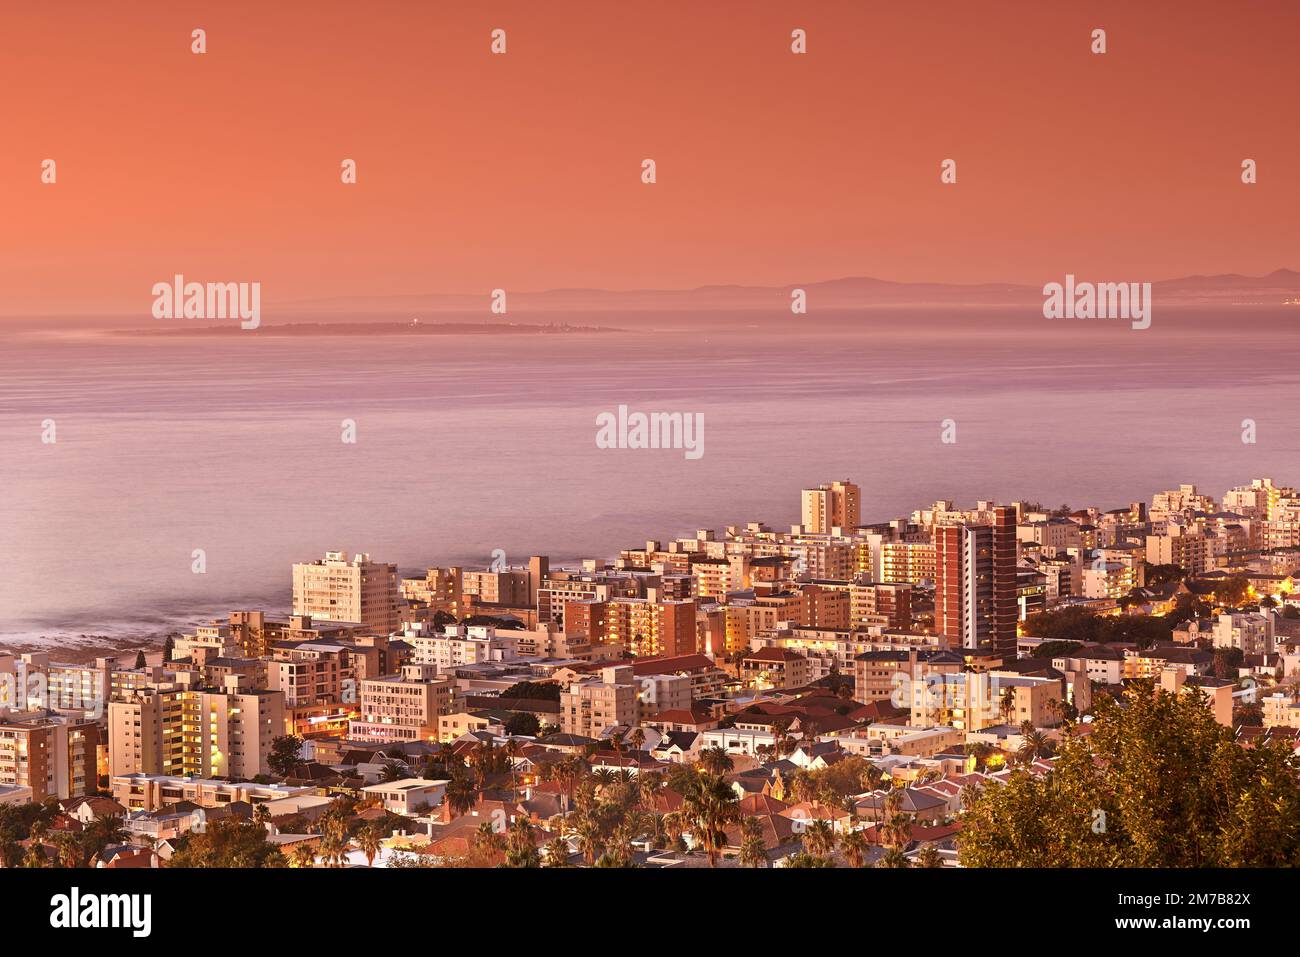 Seapoint at sunset. An aerial view of Sea Point in the Western Cape, in Cape Town, South Africa. Stock Photo